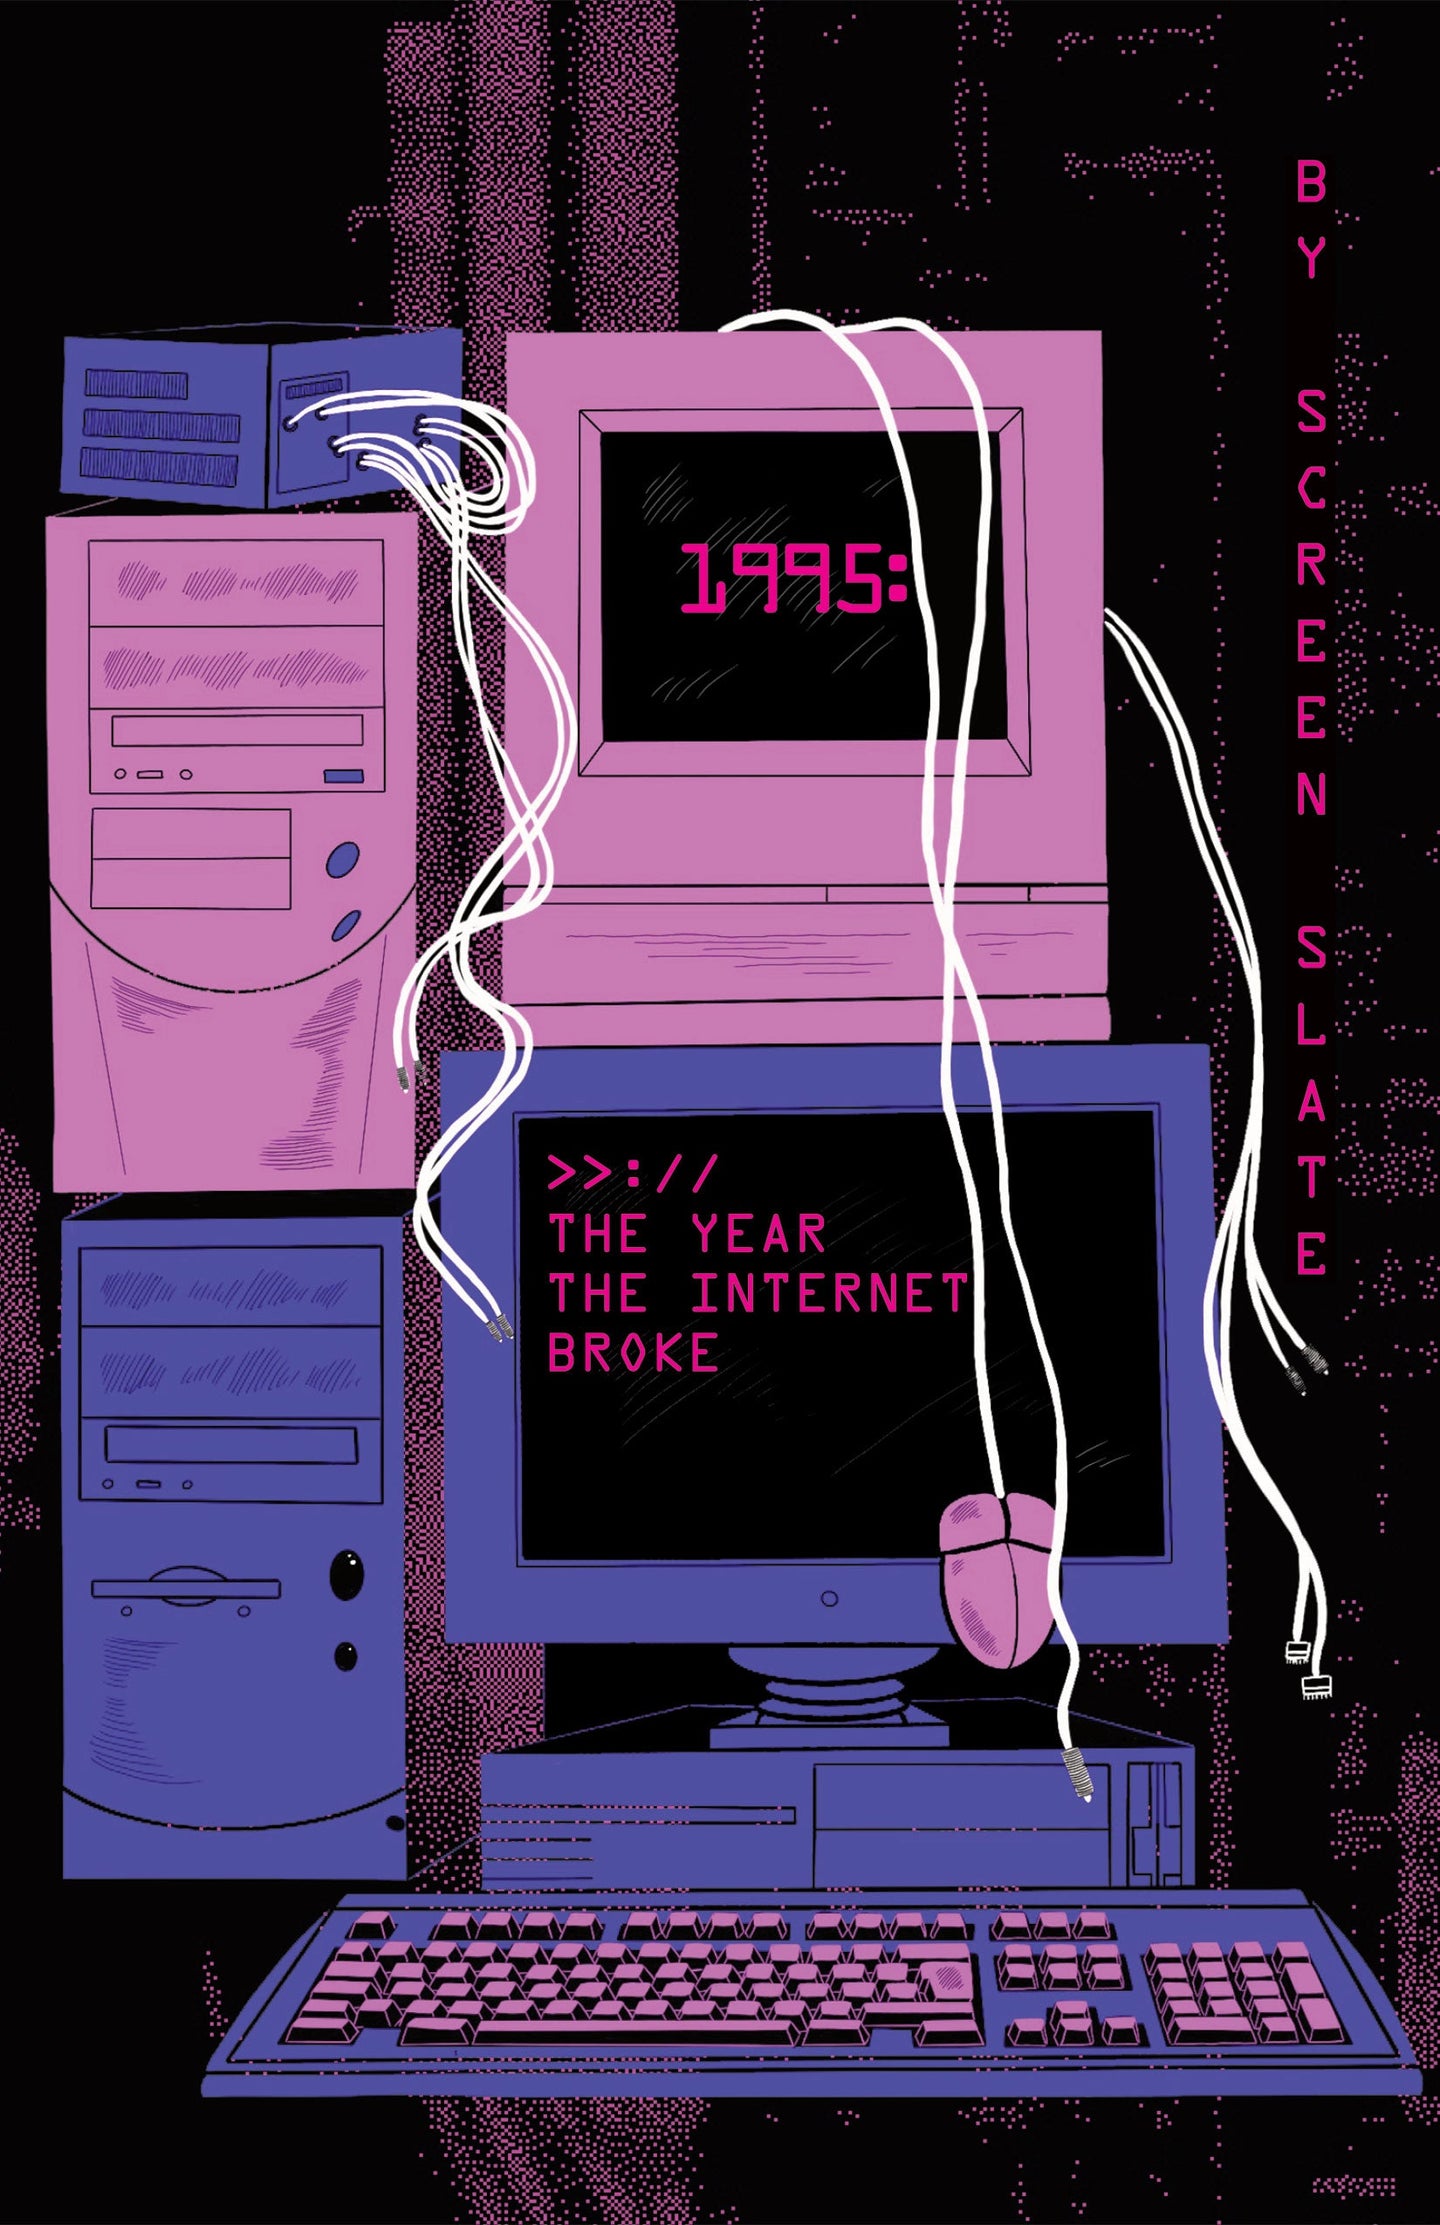 1995: The Year the Internet Broke